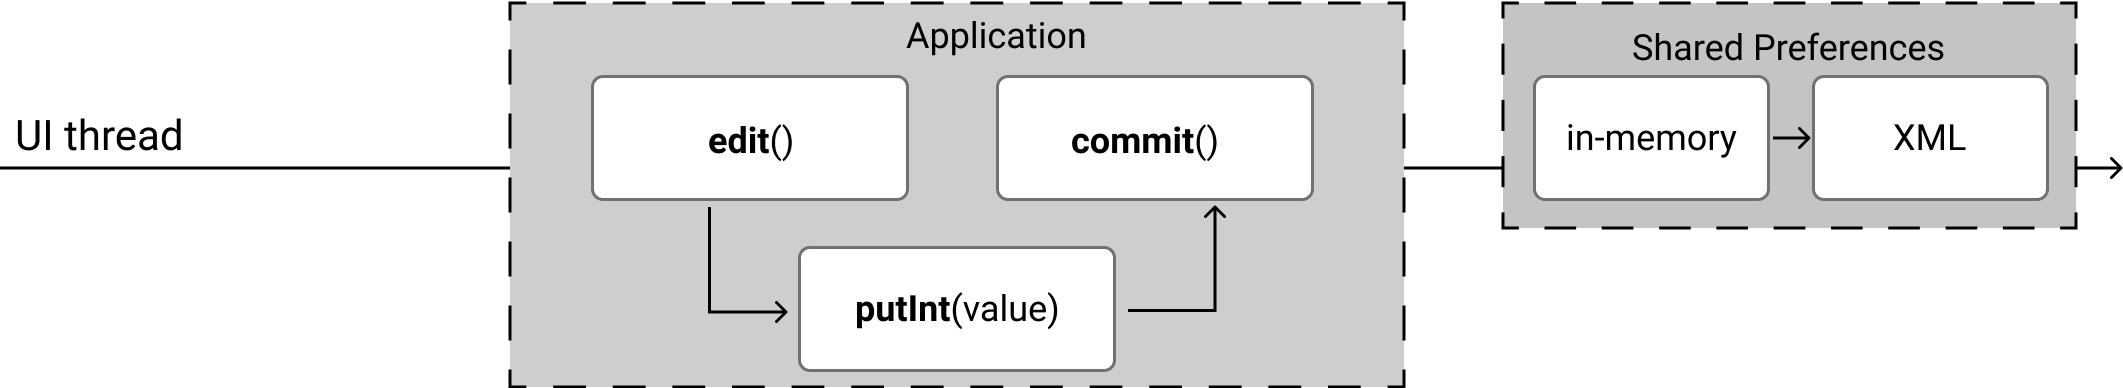 commit() function